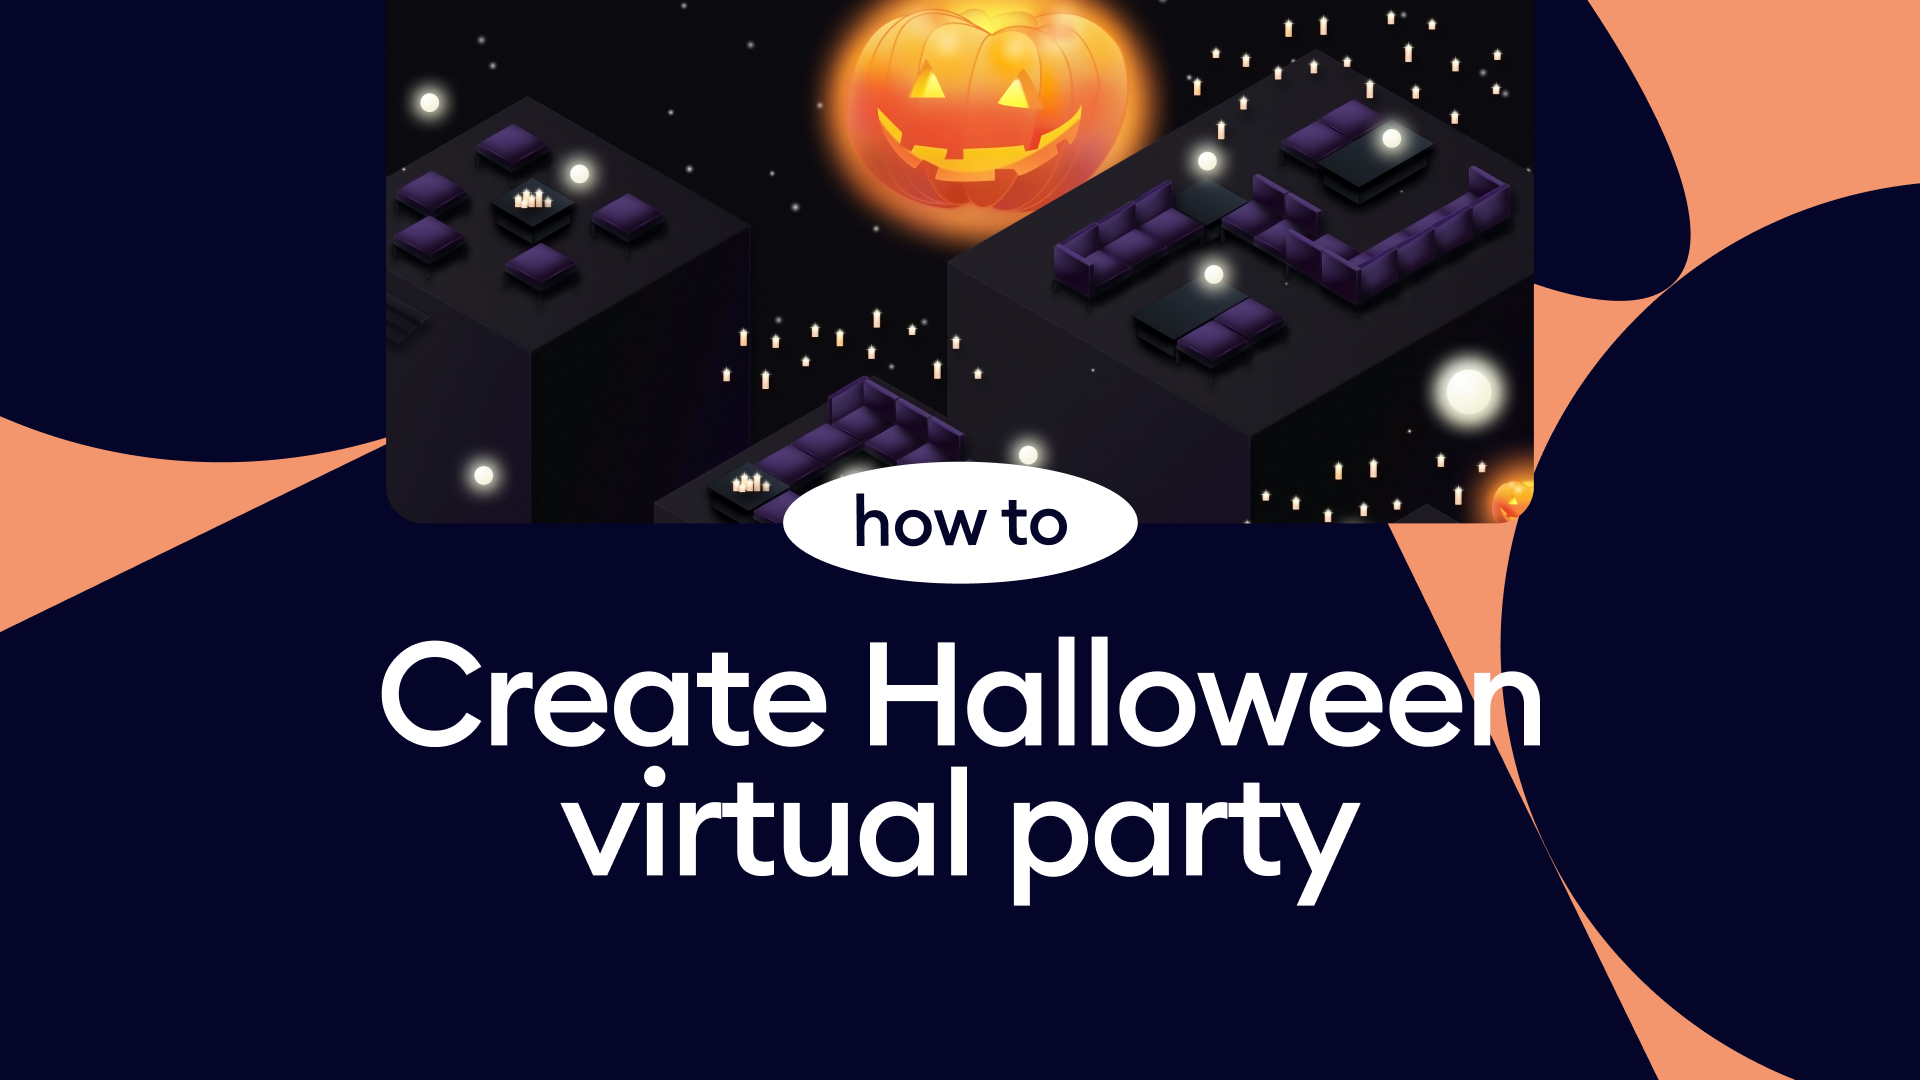 How to create a Halloween online party?